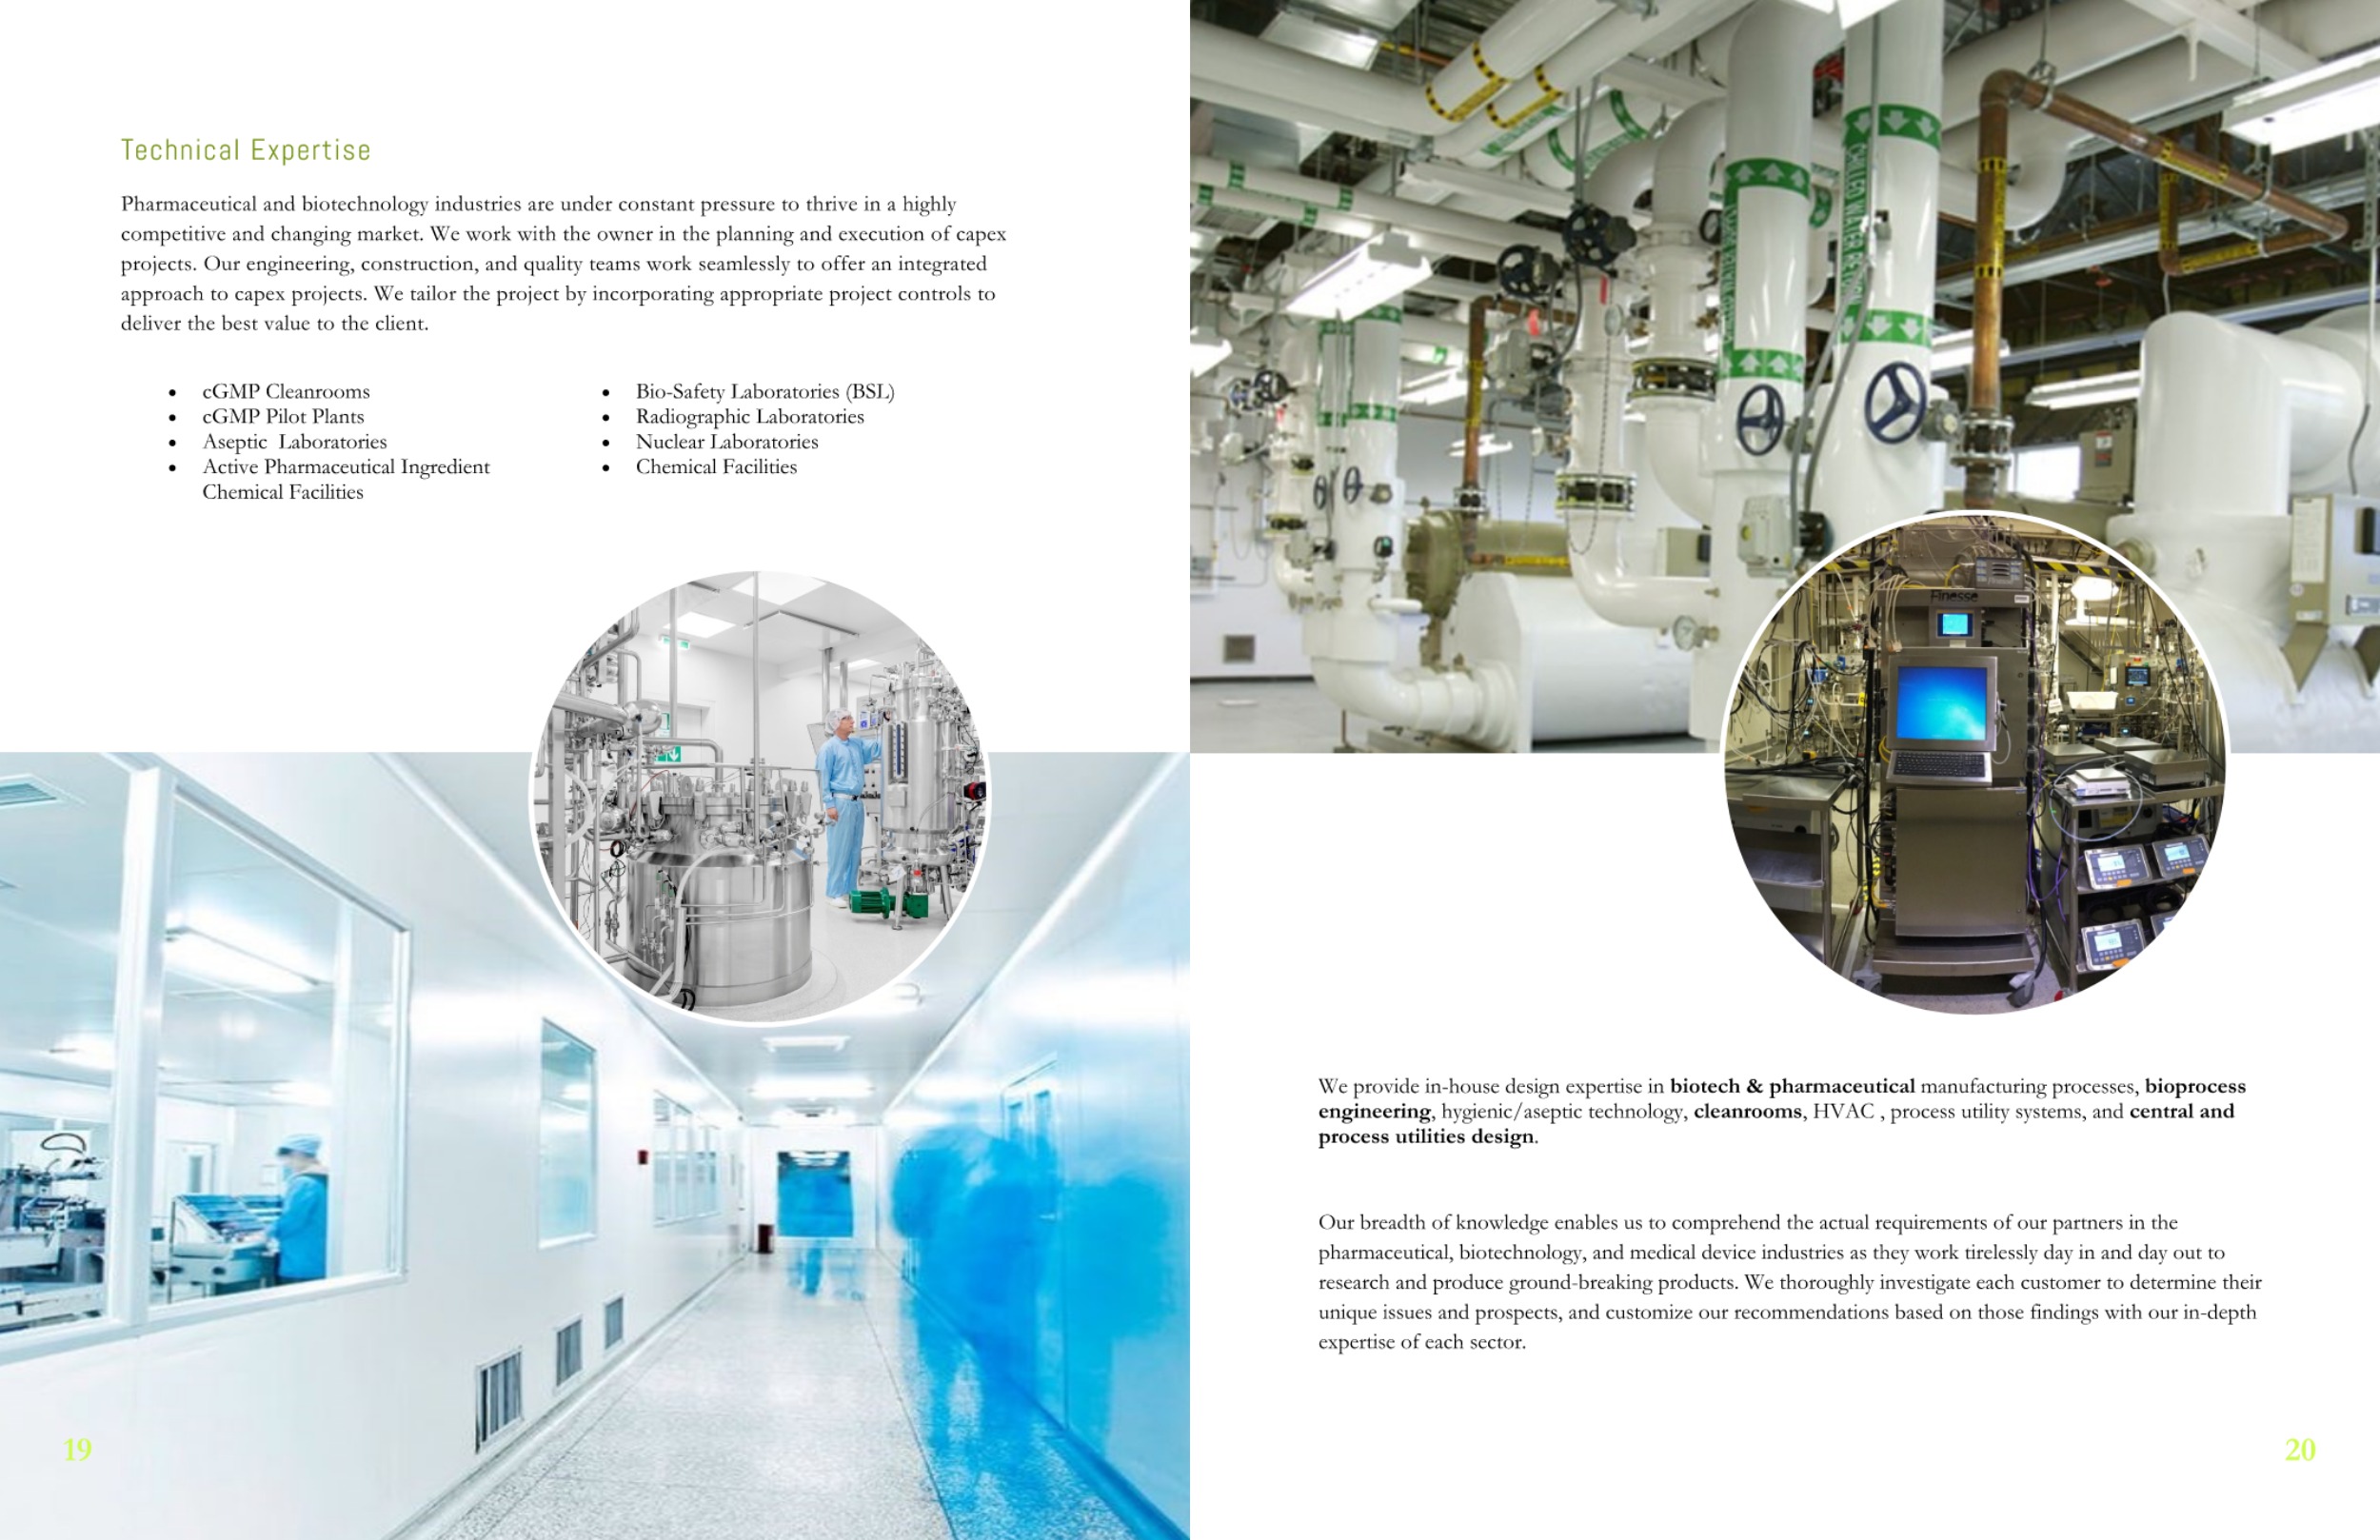 IPS Capabilities Booklet with Biotech & Pharma services, capabilities, and methods.